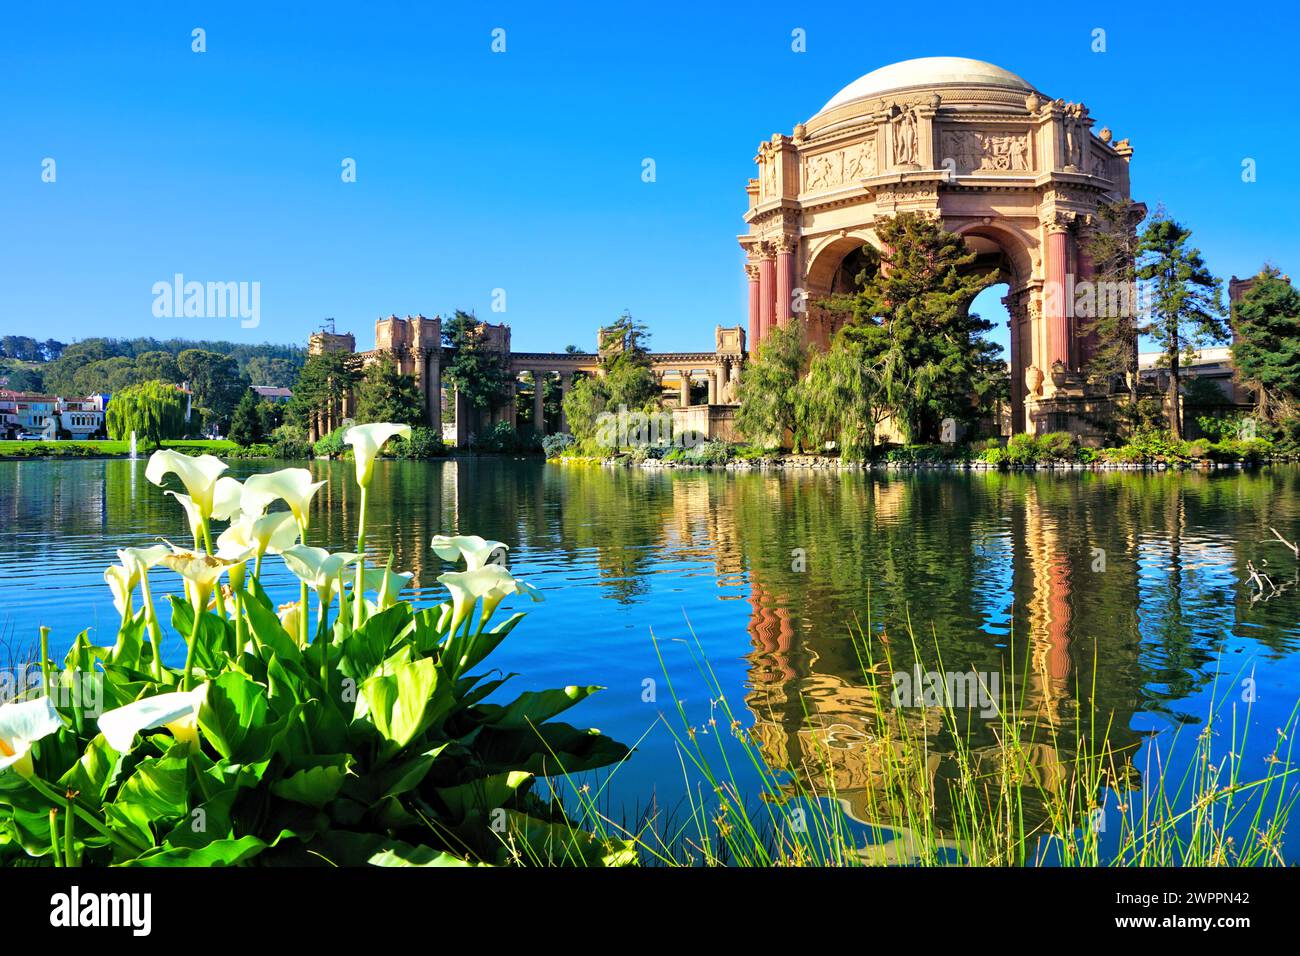 Palace of fine Arts with flowers and reflections under blue sky, San Francisco, California, USA Stock Photo